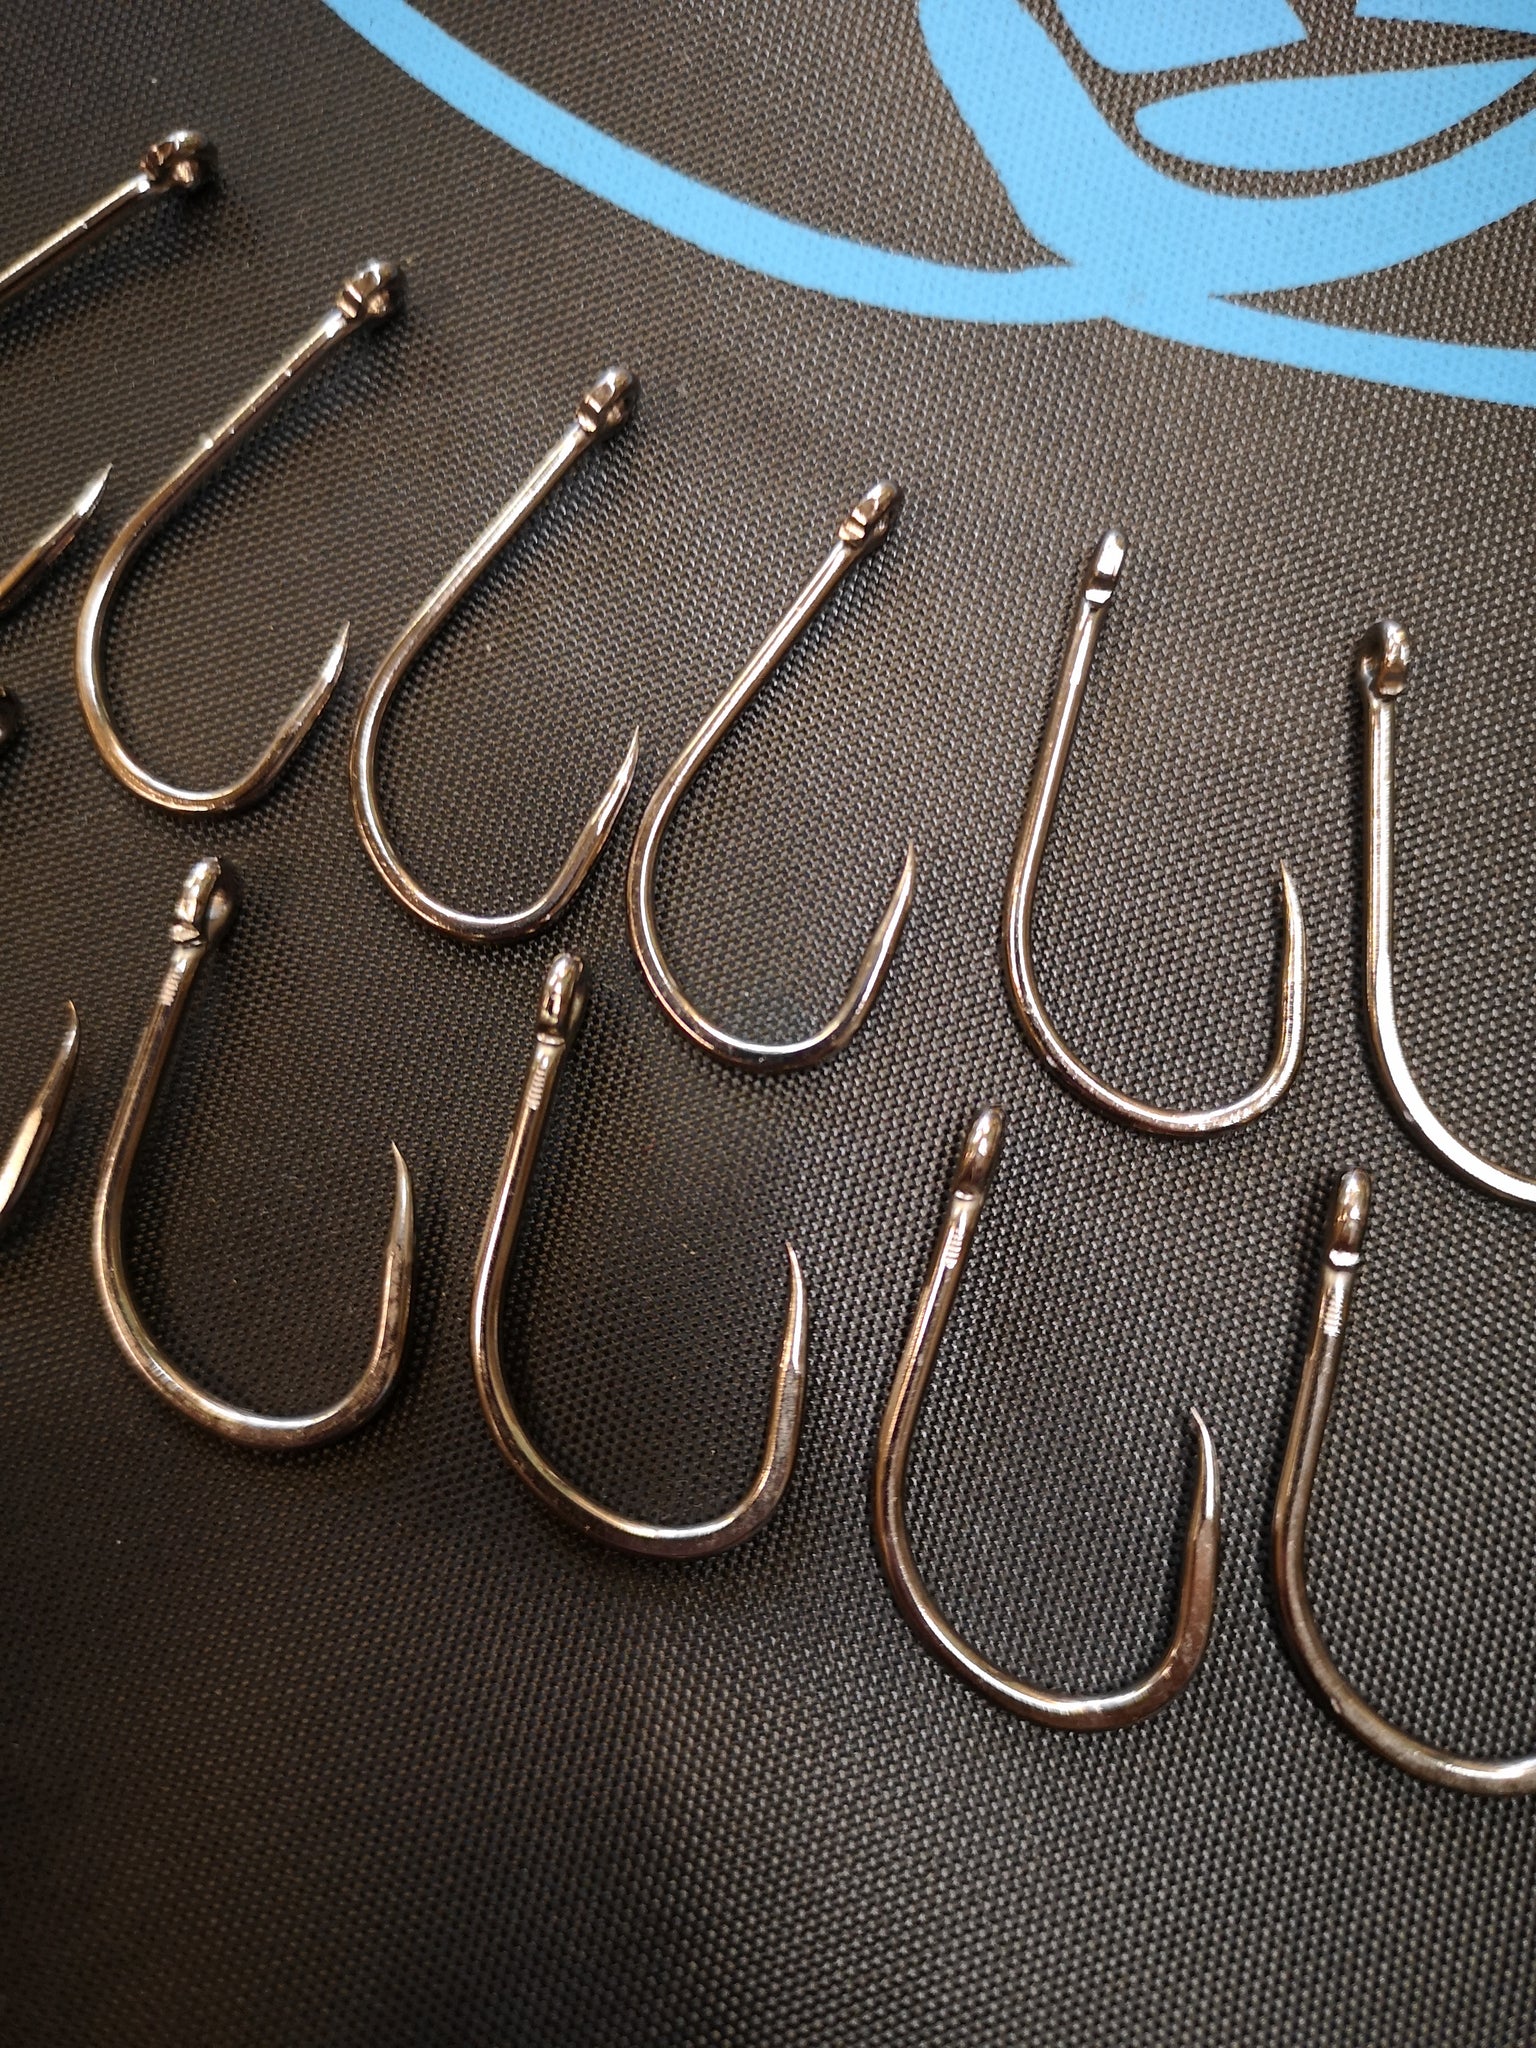 4/0 to Size 2 Barbless Hooks.Biggest,Strongest & Most Affordable Listed on  .